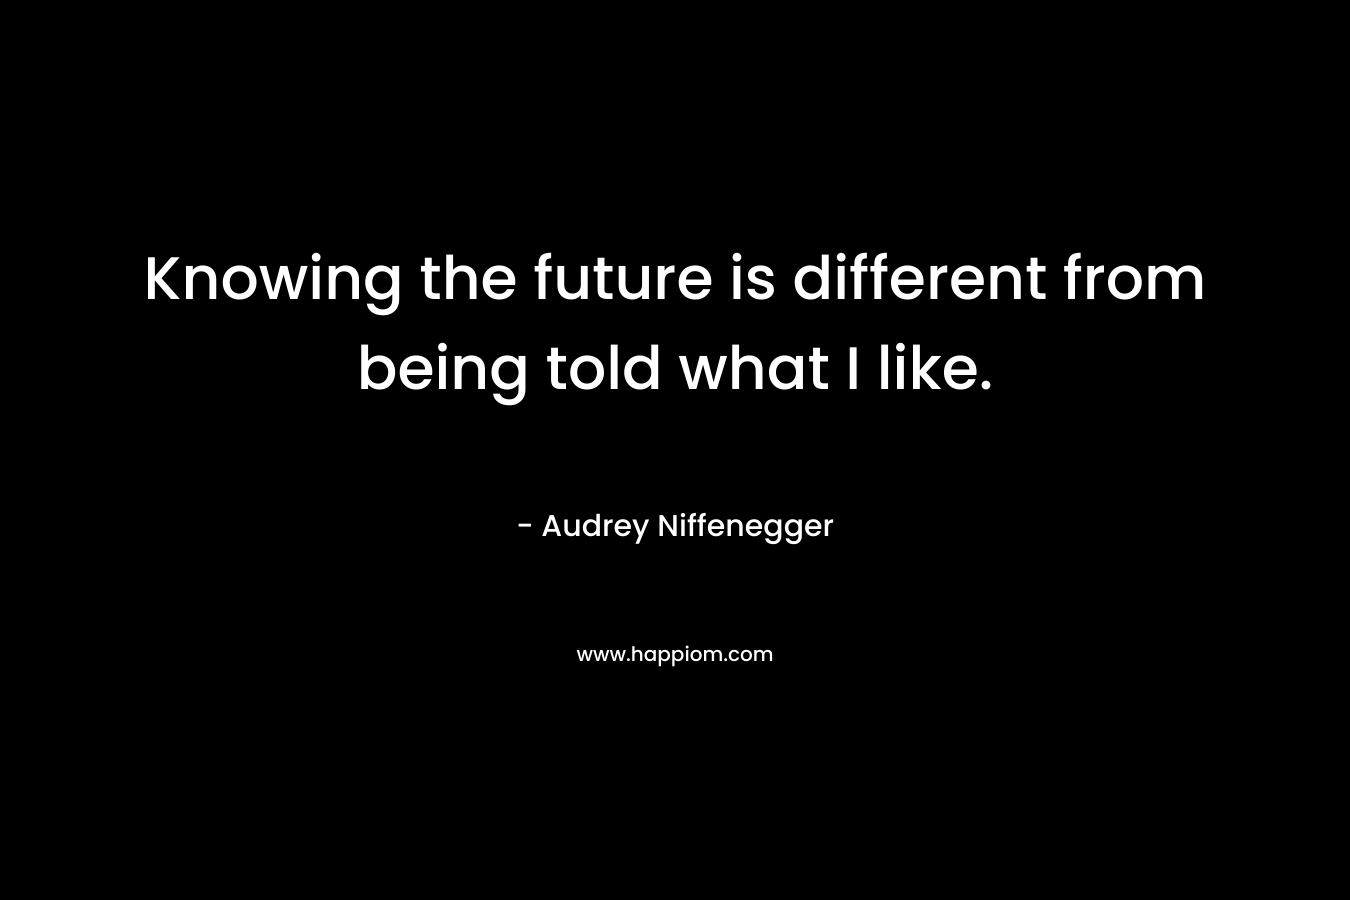 Knowing the future is different from being told what I like. – Audrey Niffenegger